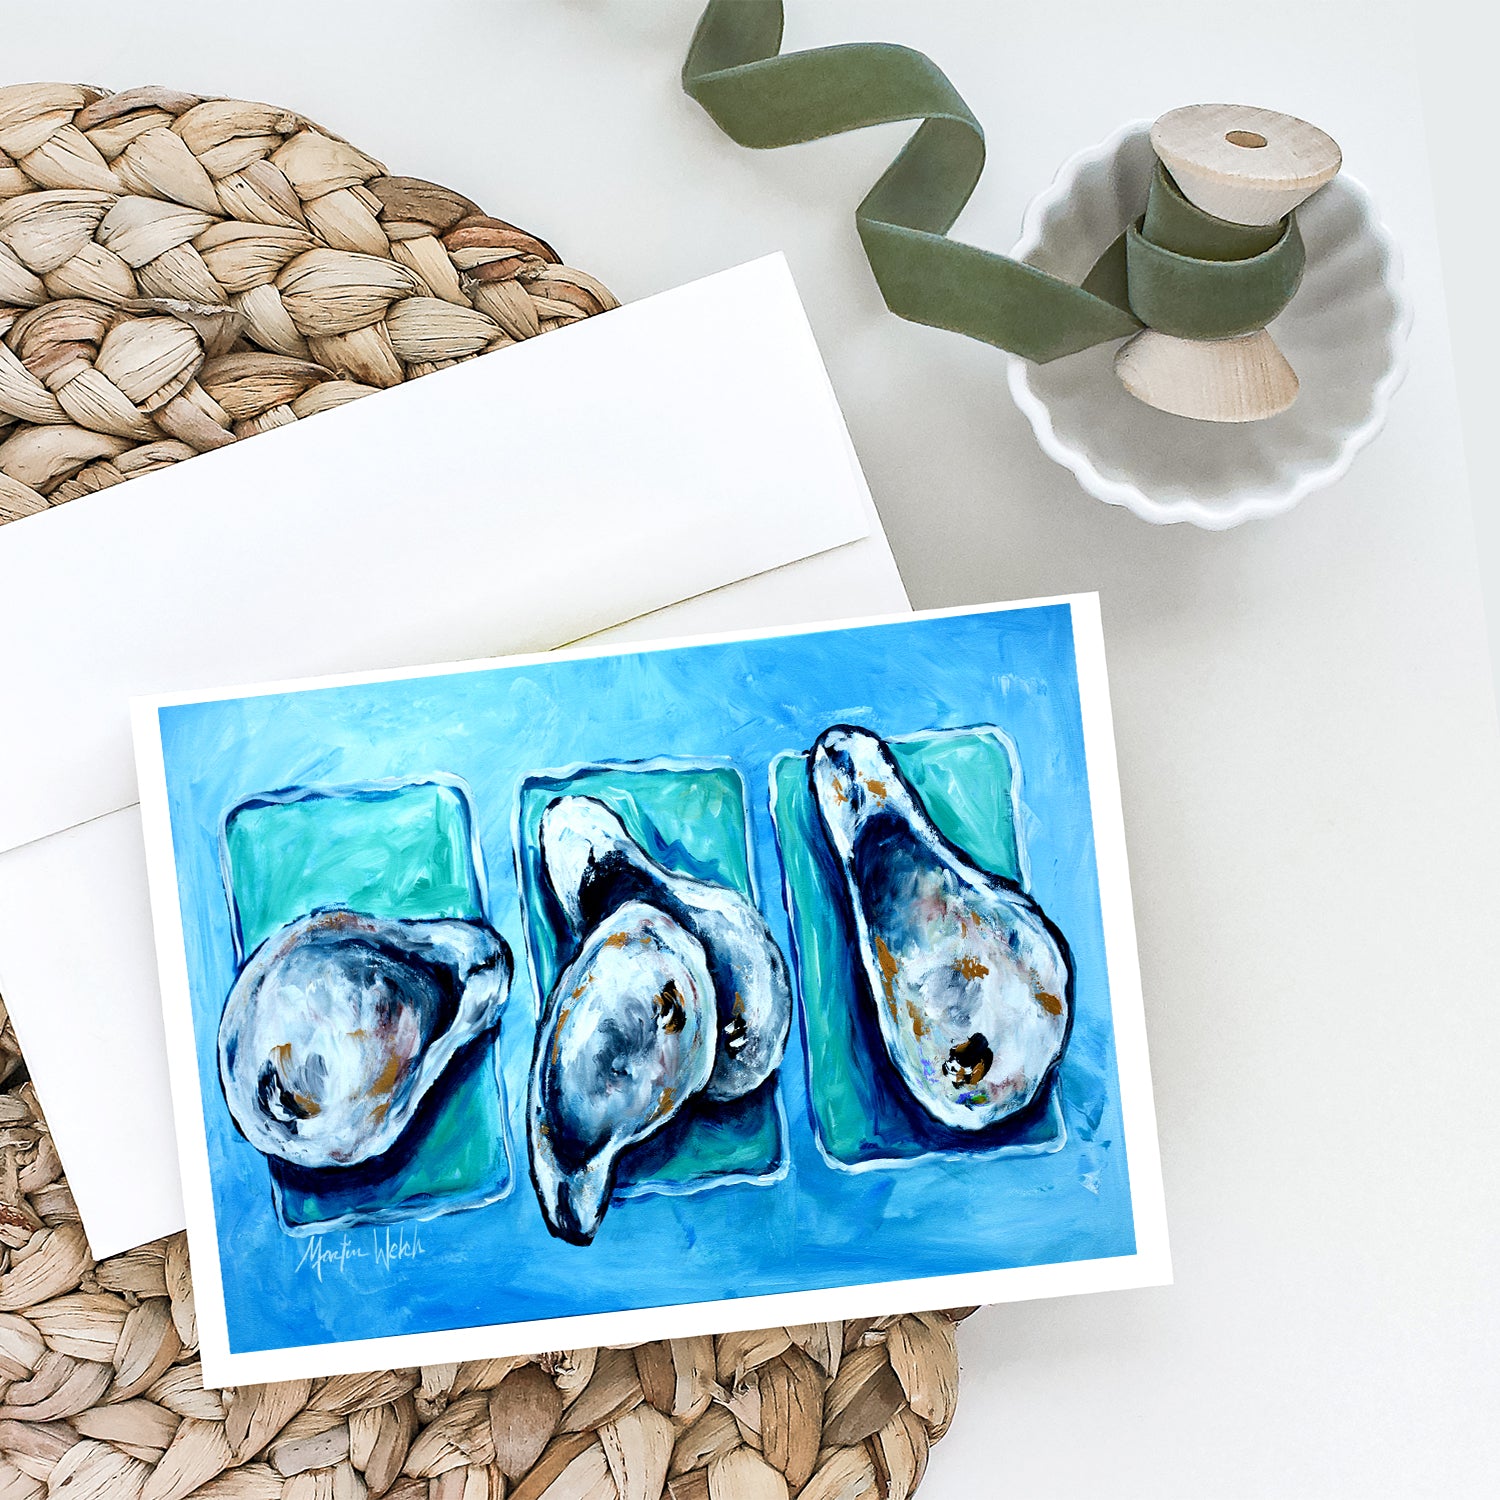 Buy this Oysters Oyster + Oyster = Oysters Greeting Cards Pack of 8